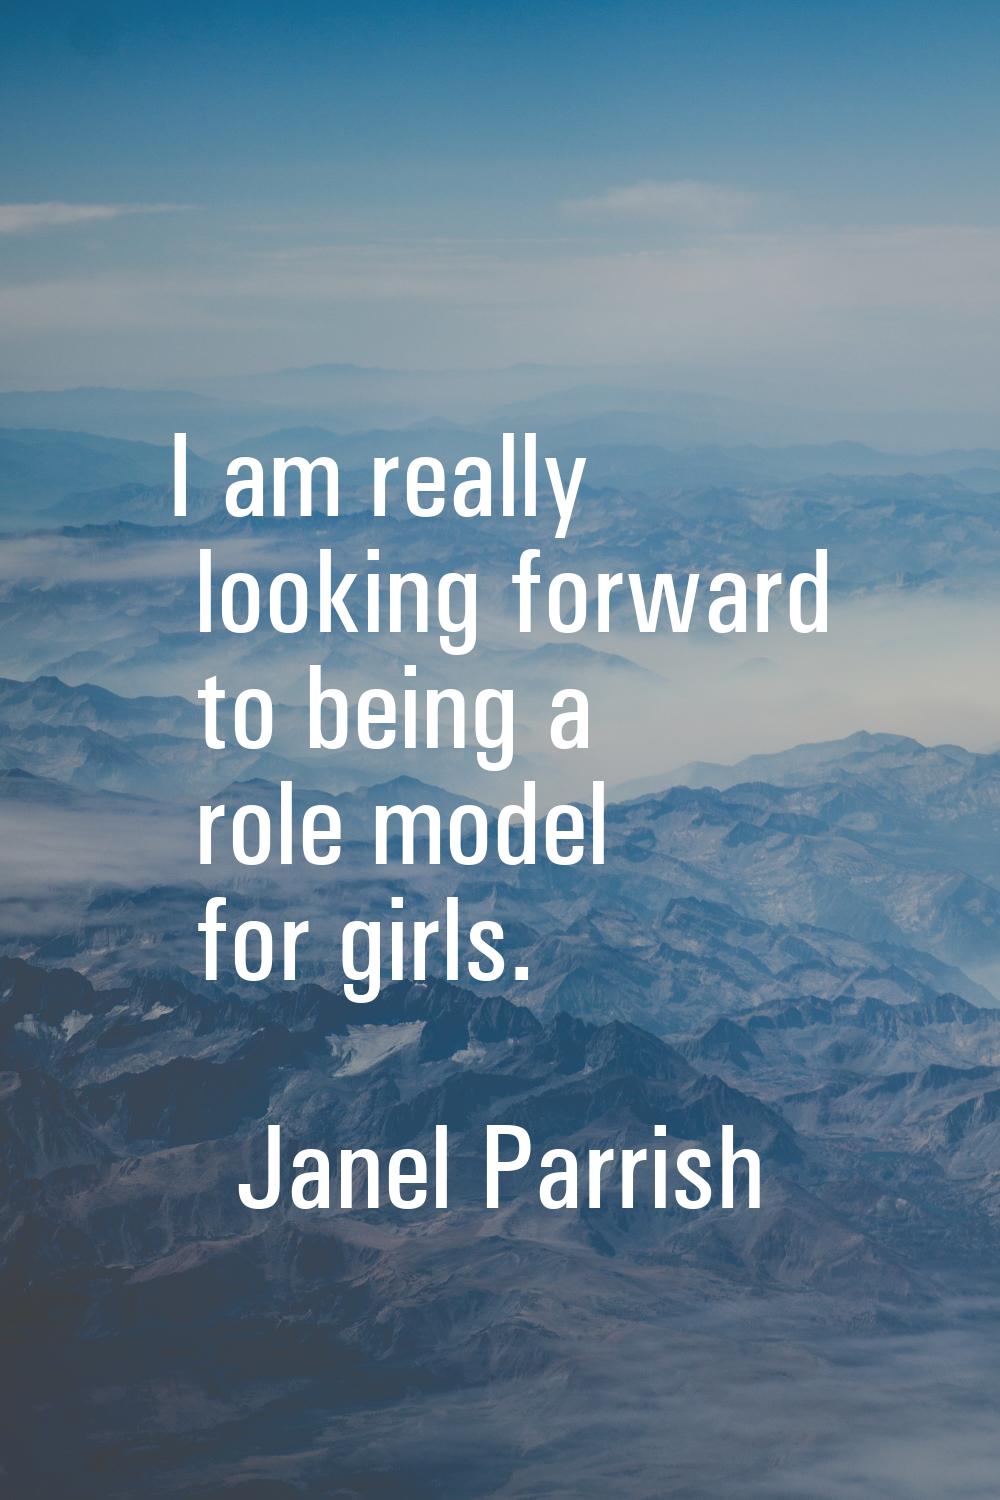 I am really looking forward to being a role model for girls.